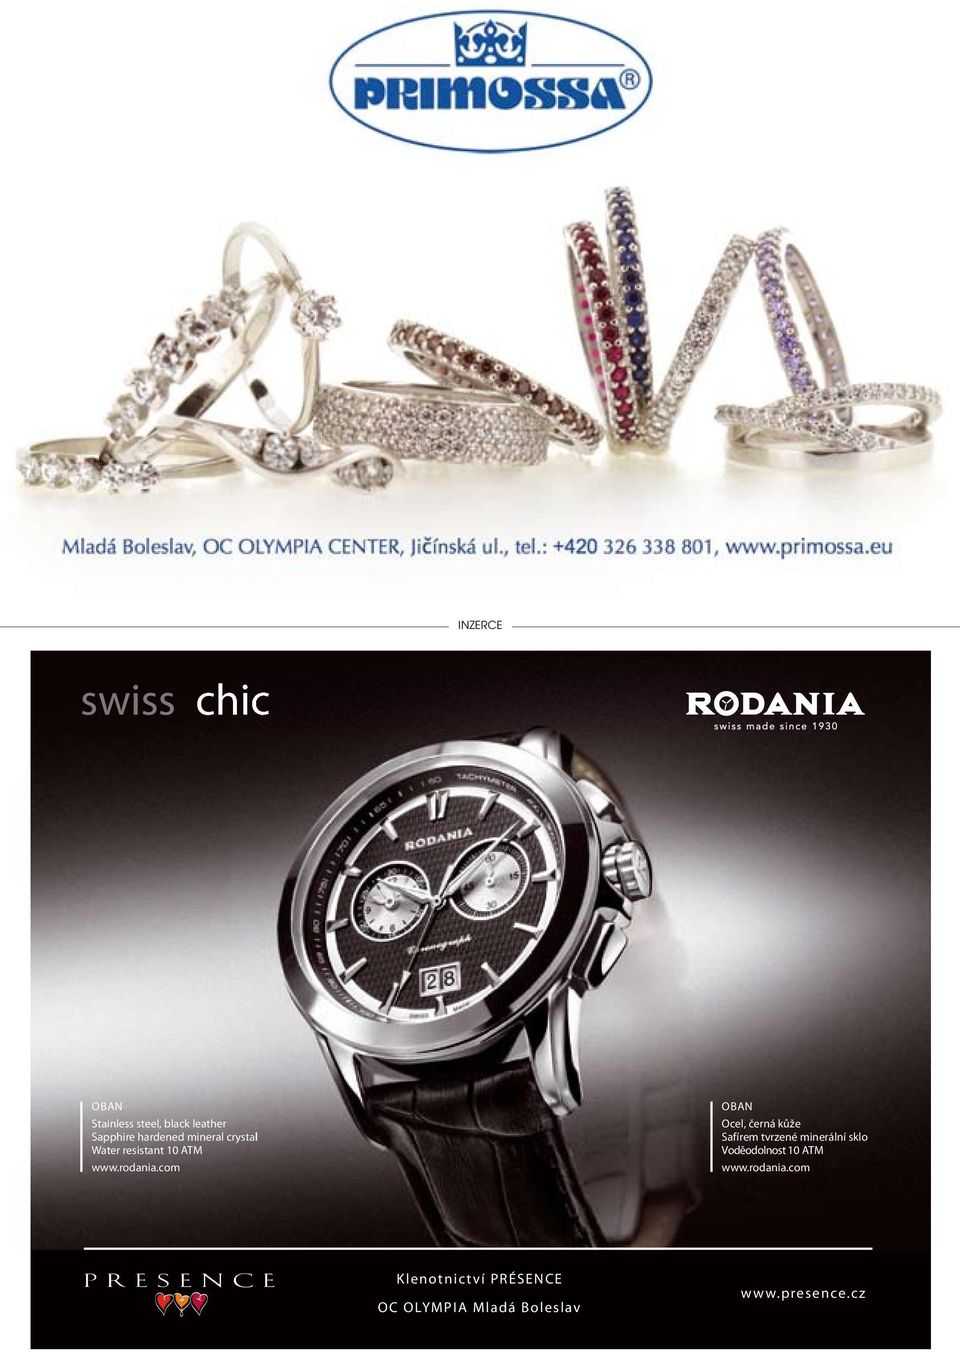 hardened mineral crystal Water resistant 10 ATM www.rodania.